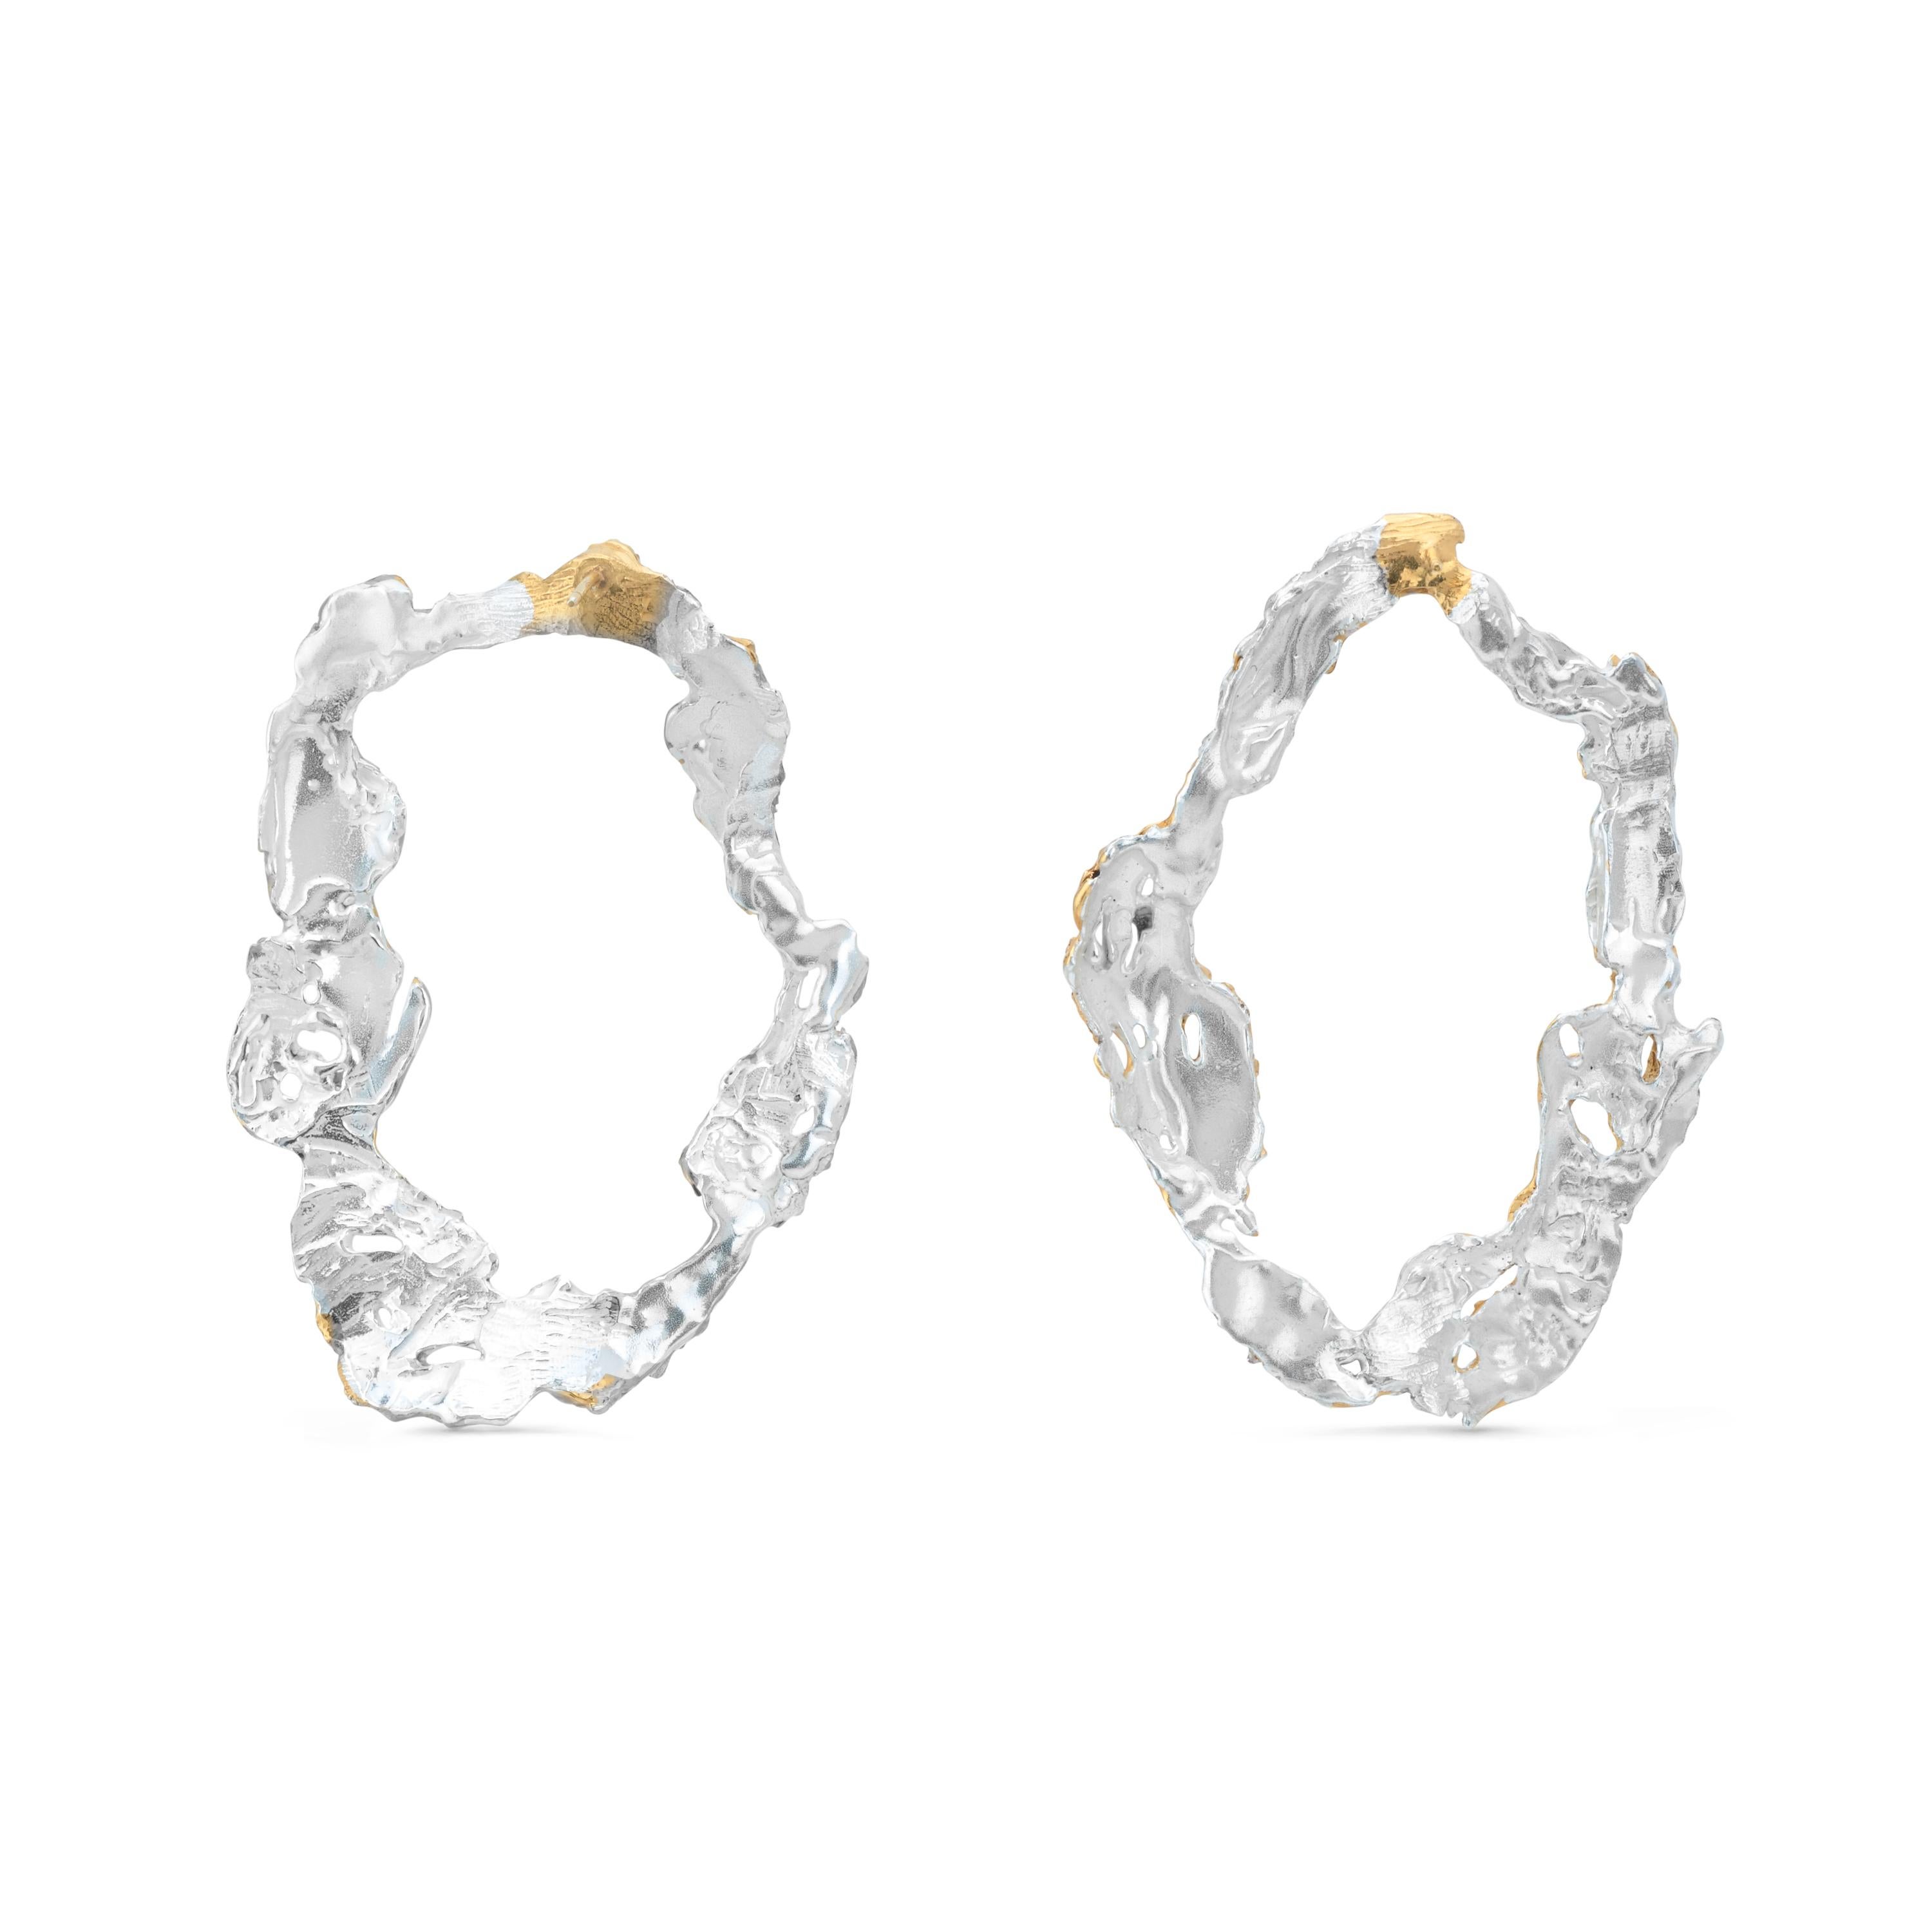 Translated from Armenian, Dzovag means ‘lake’, a large standing or slow-moving body of water surrounded by land. In the same way that lakes stand proudly among the natural landscape, these earrings make for a bold declaration of style and identity –